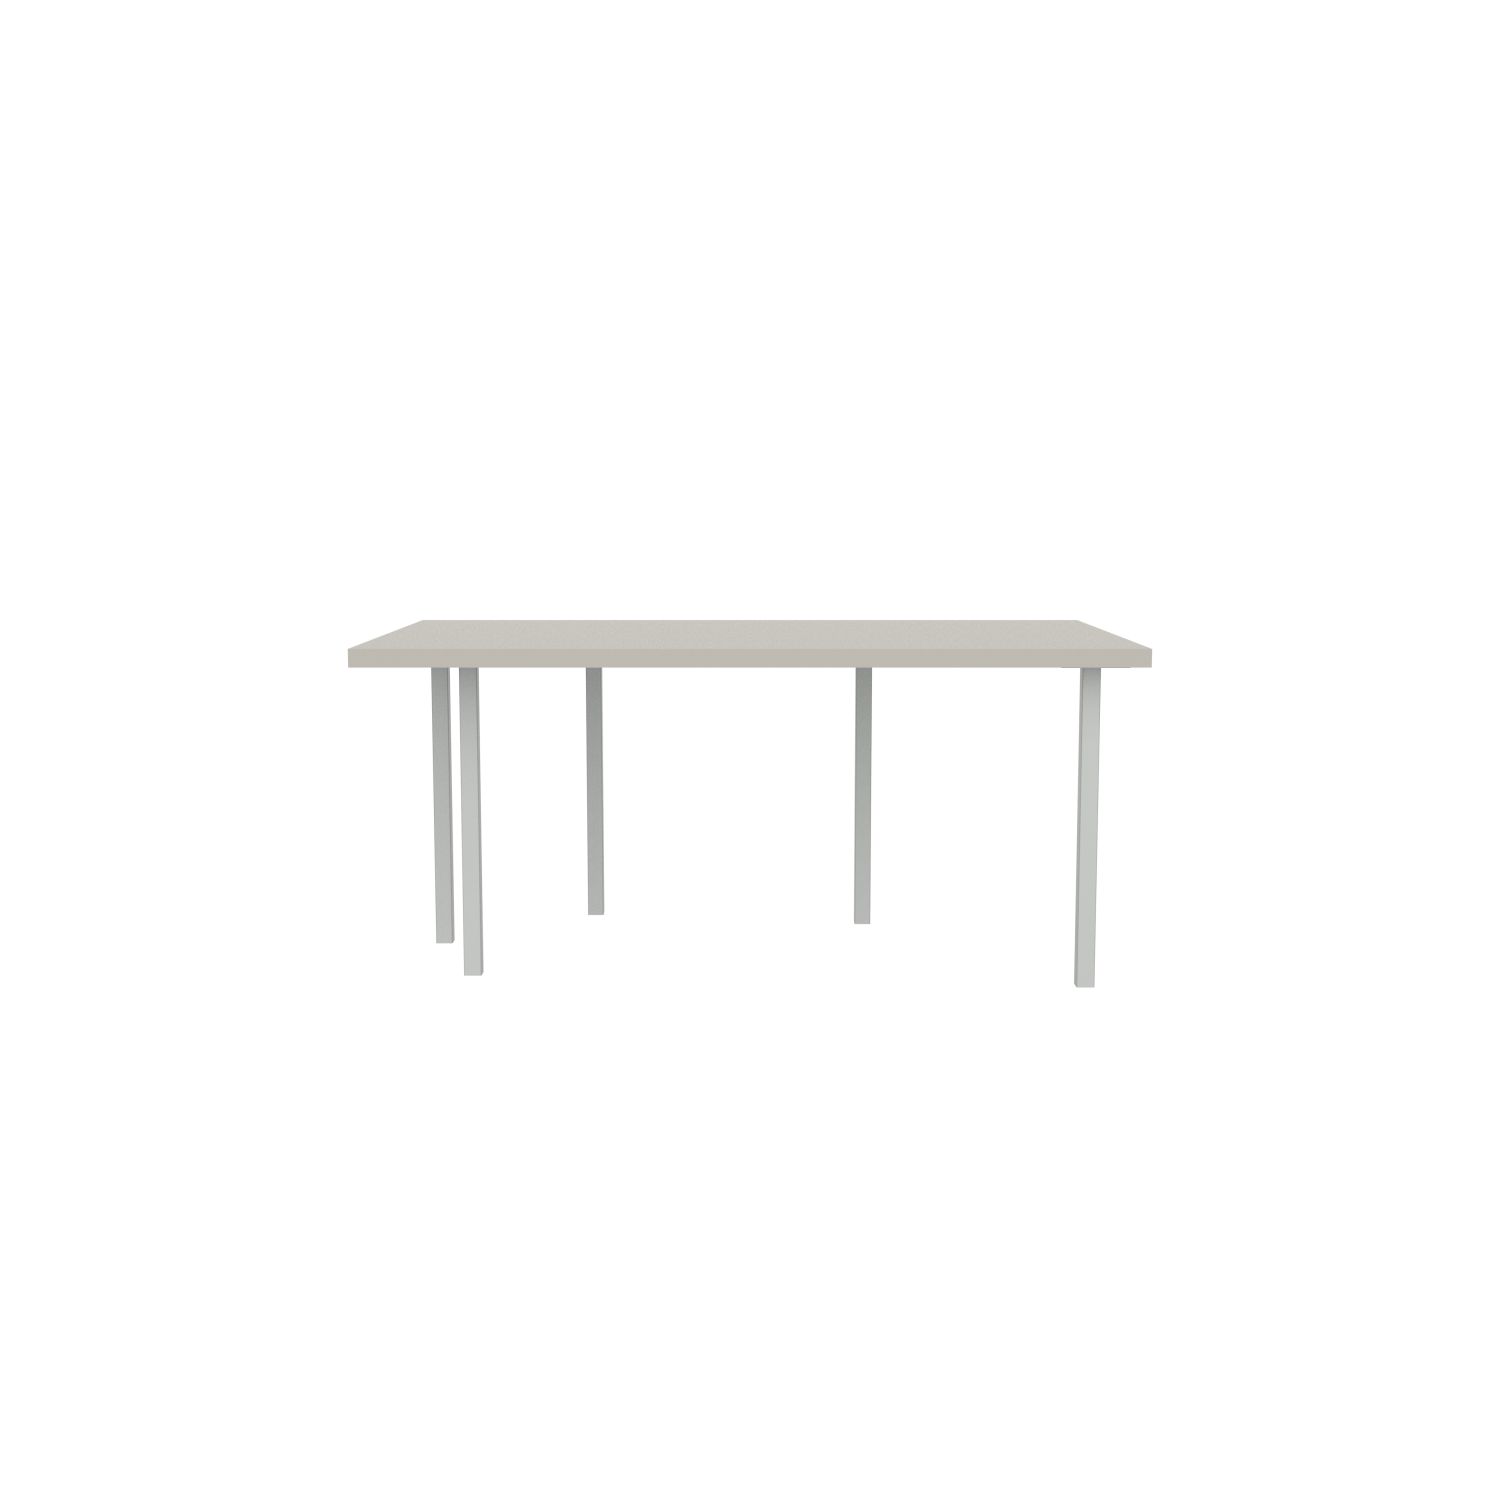 lensvelt bbrand table five fixed heigt 103x172 hpl white 50 mm price level 1 light grey ral7035